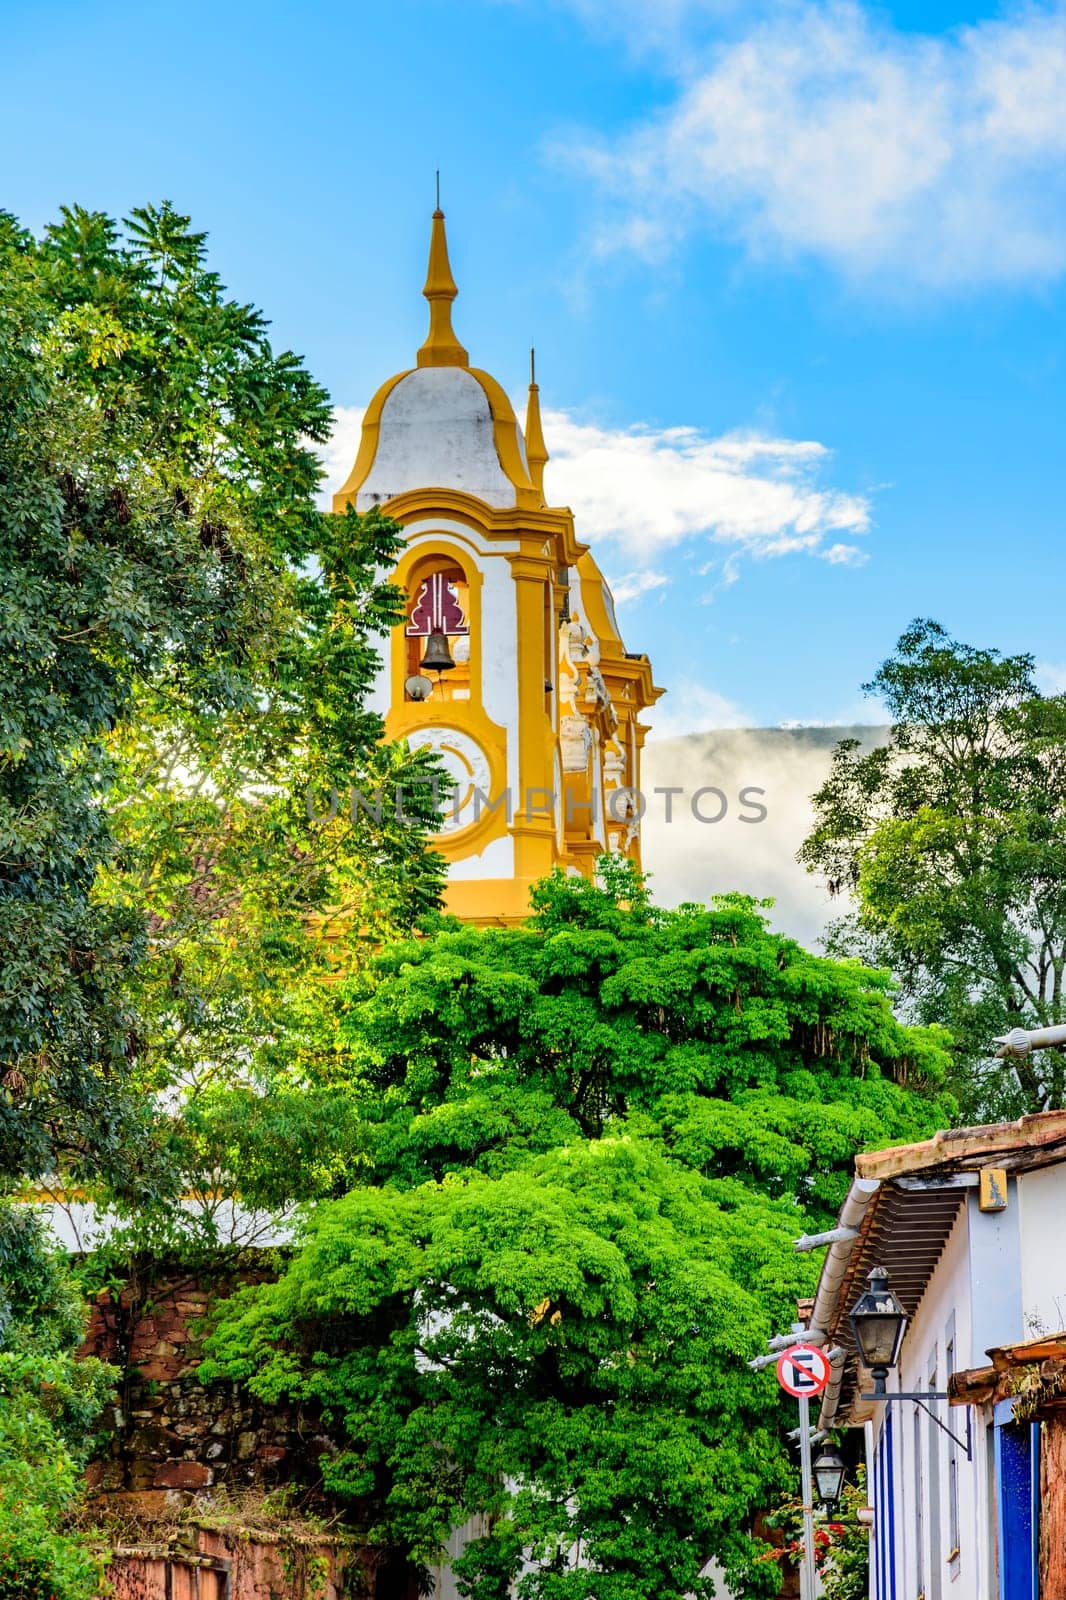 Baroque church tower rising through vegetation and buildings in the city of Tiradentes in the state of Minas Gerais